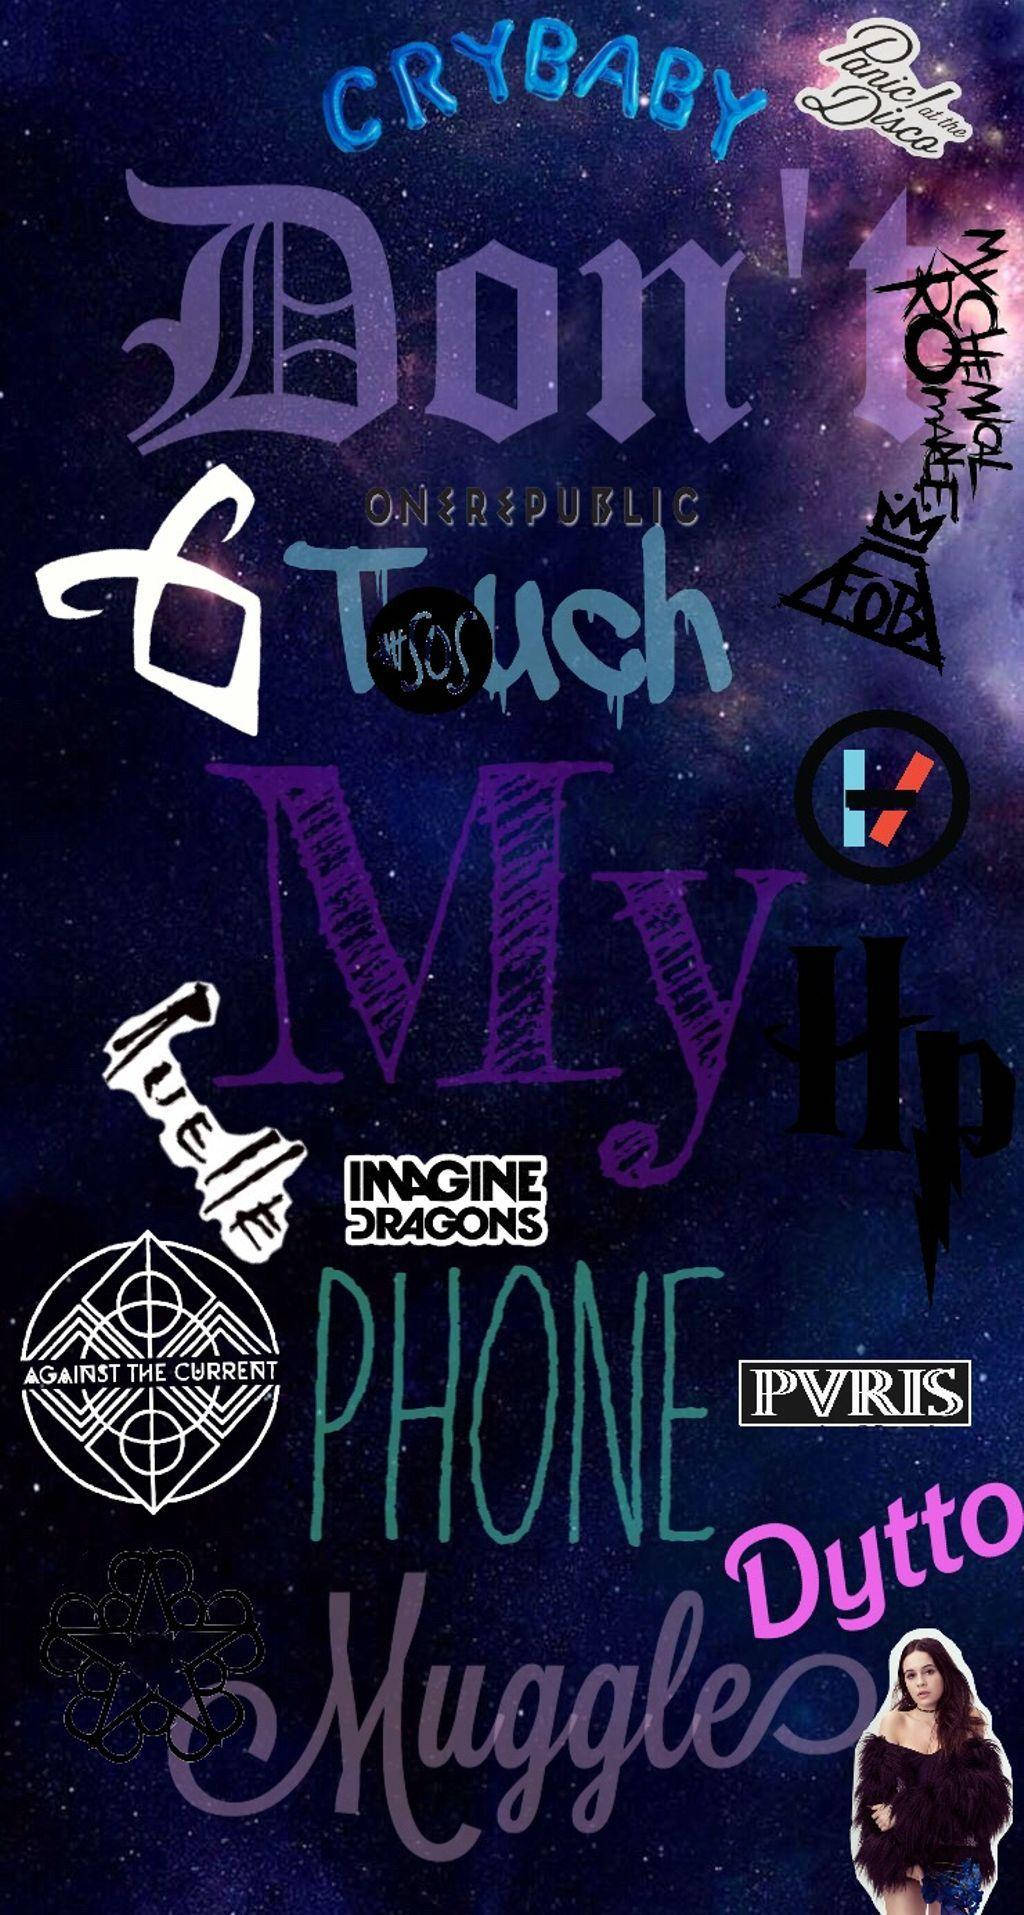 Aesthetic phone wallpaper with various popular song titles and bands. - Don't touch my phone